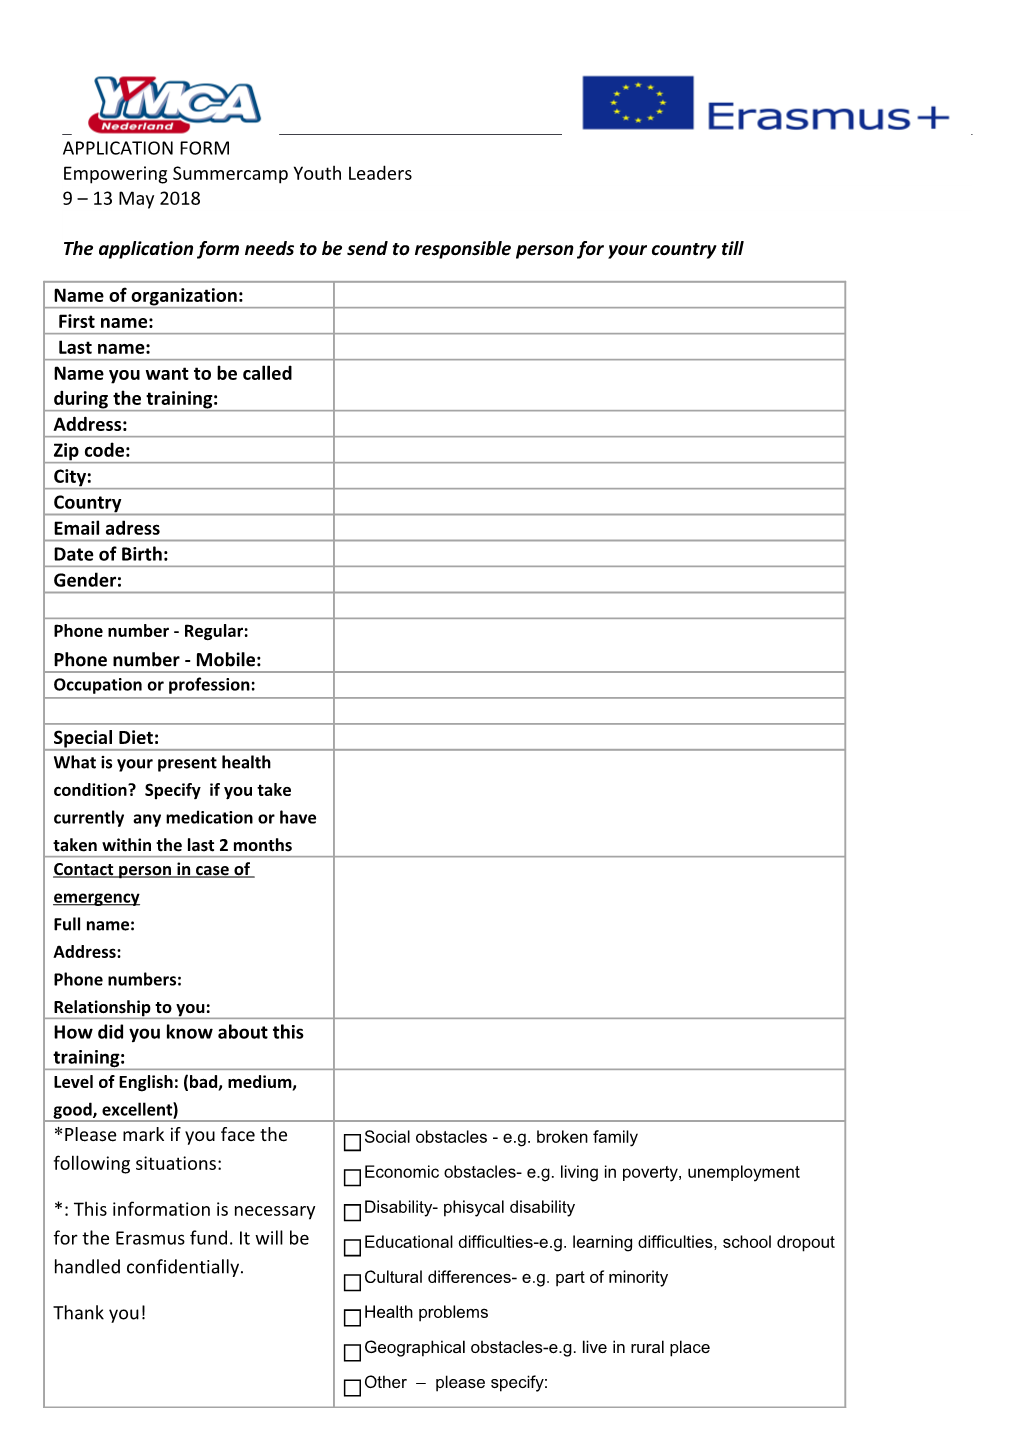 The Application Form Needs to Be Send to Responsible Person for Your Country Till